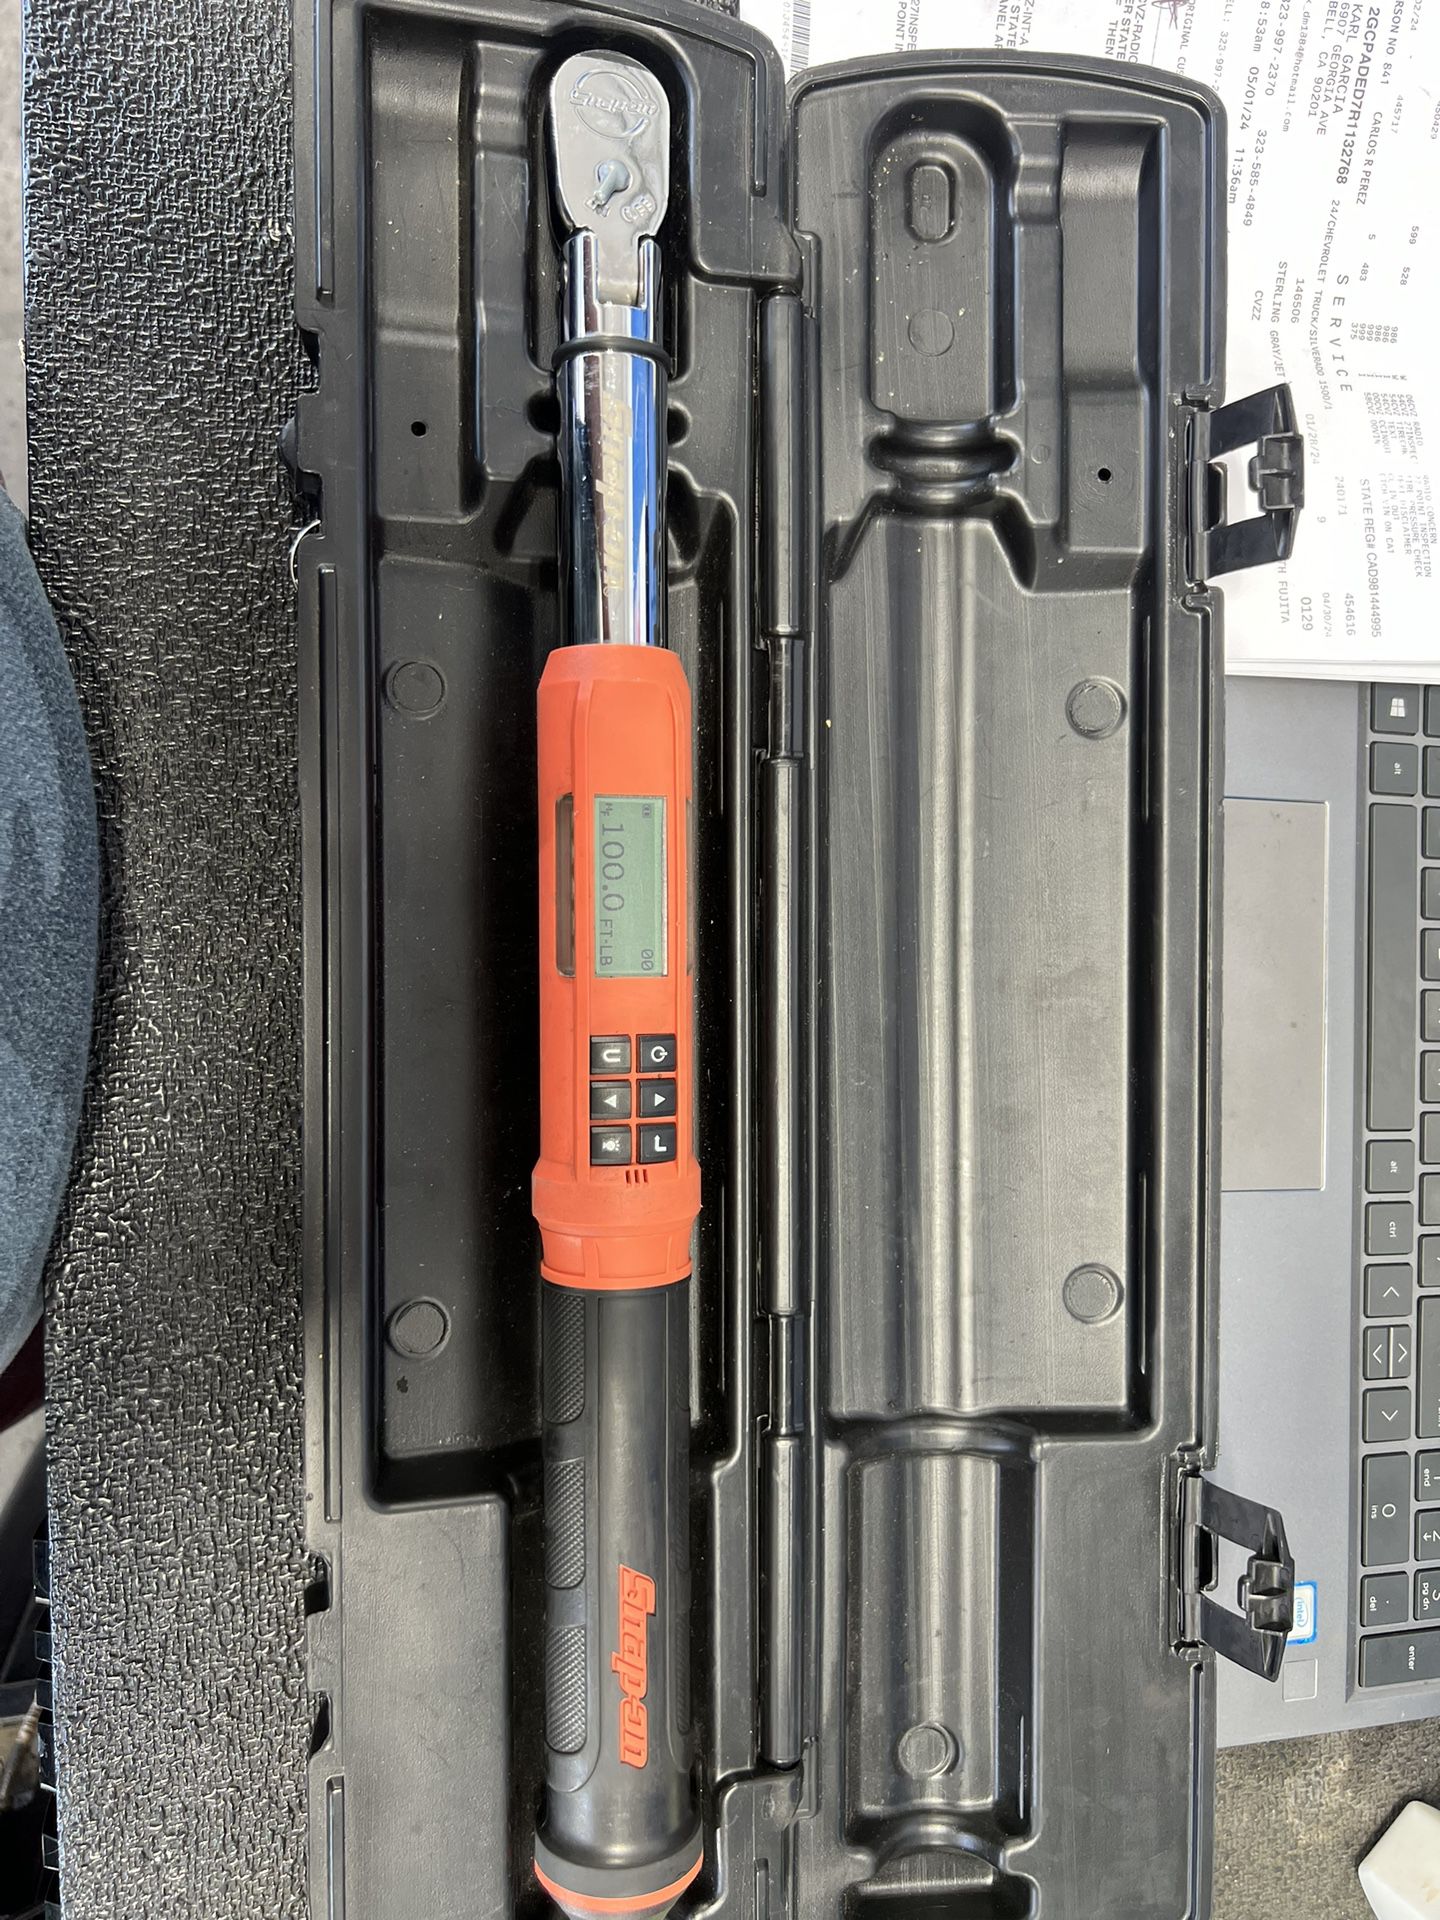 Snapon Torque Wrench 